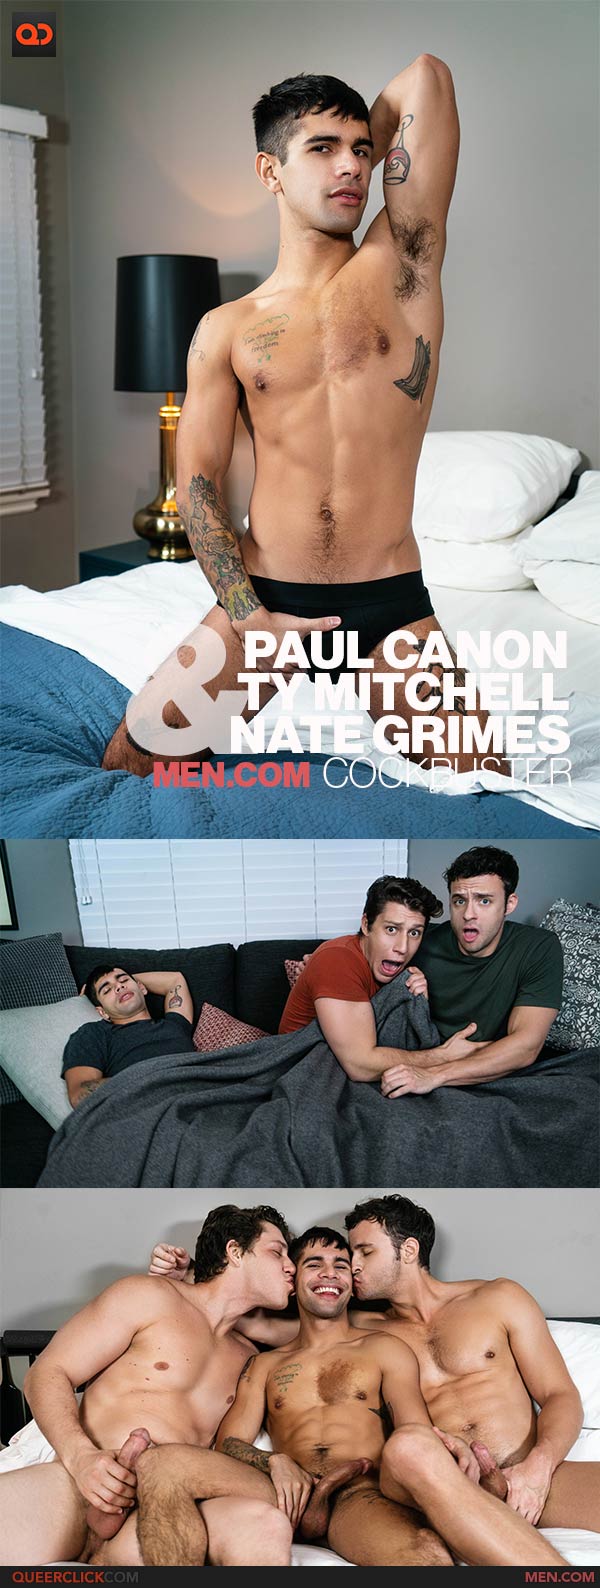 Men.com: Paul Canon, Ty Mitchell and Nate Grimes